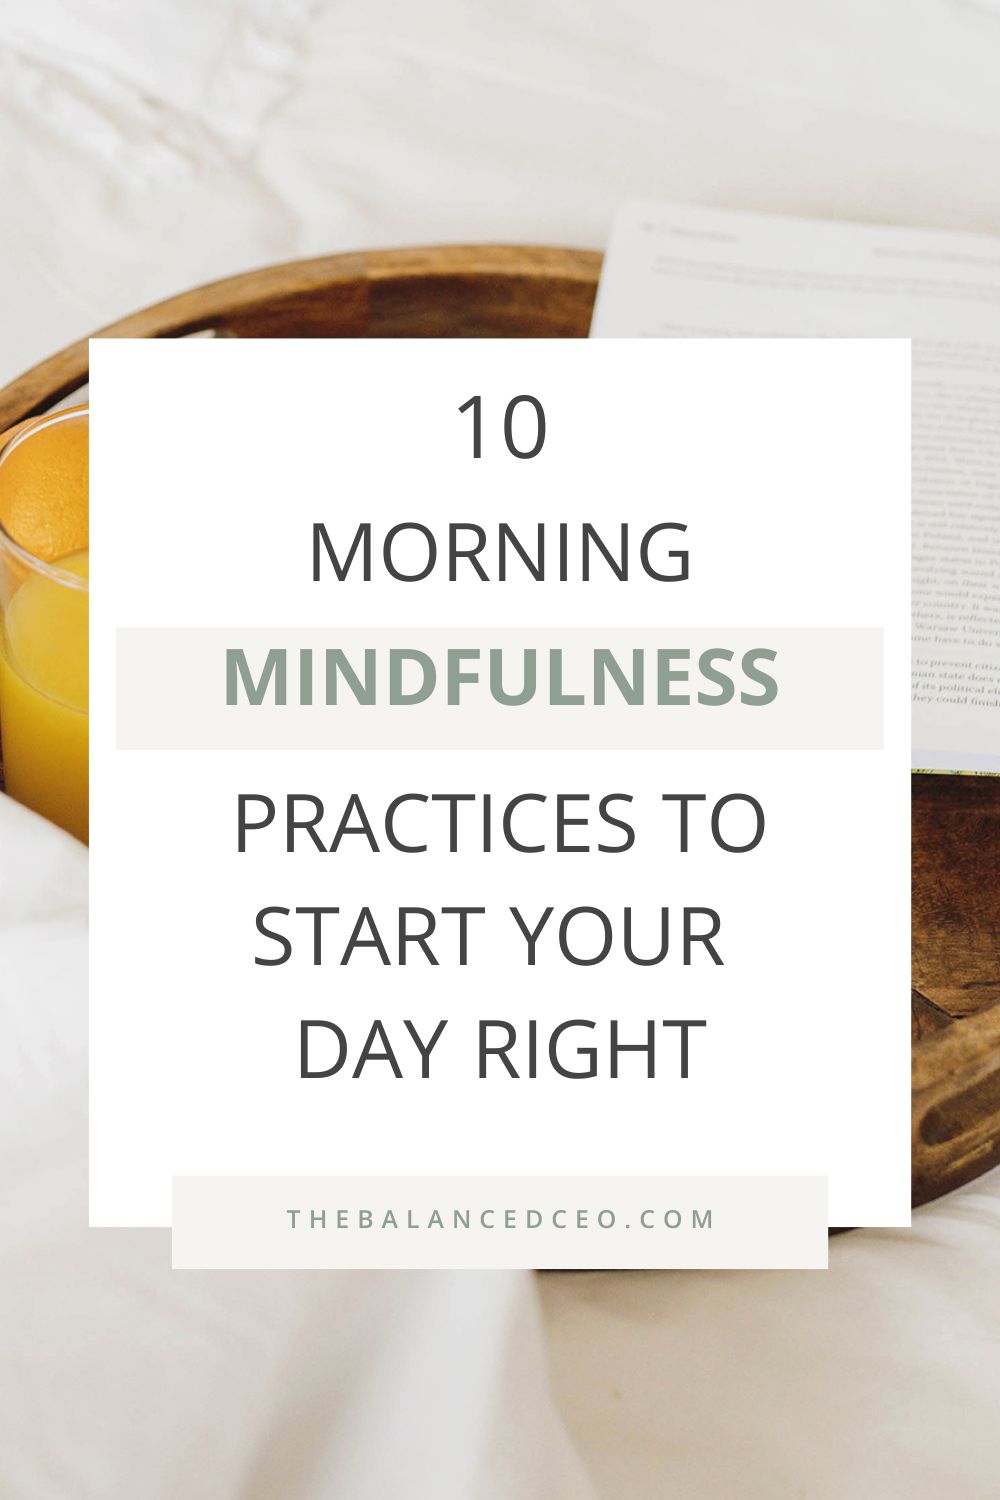 10 Morning Mindfulness Practices To Start Your Day Right